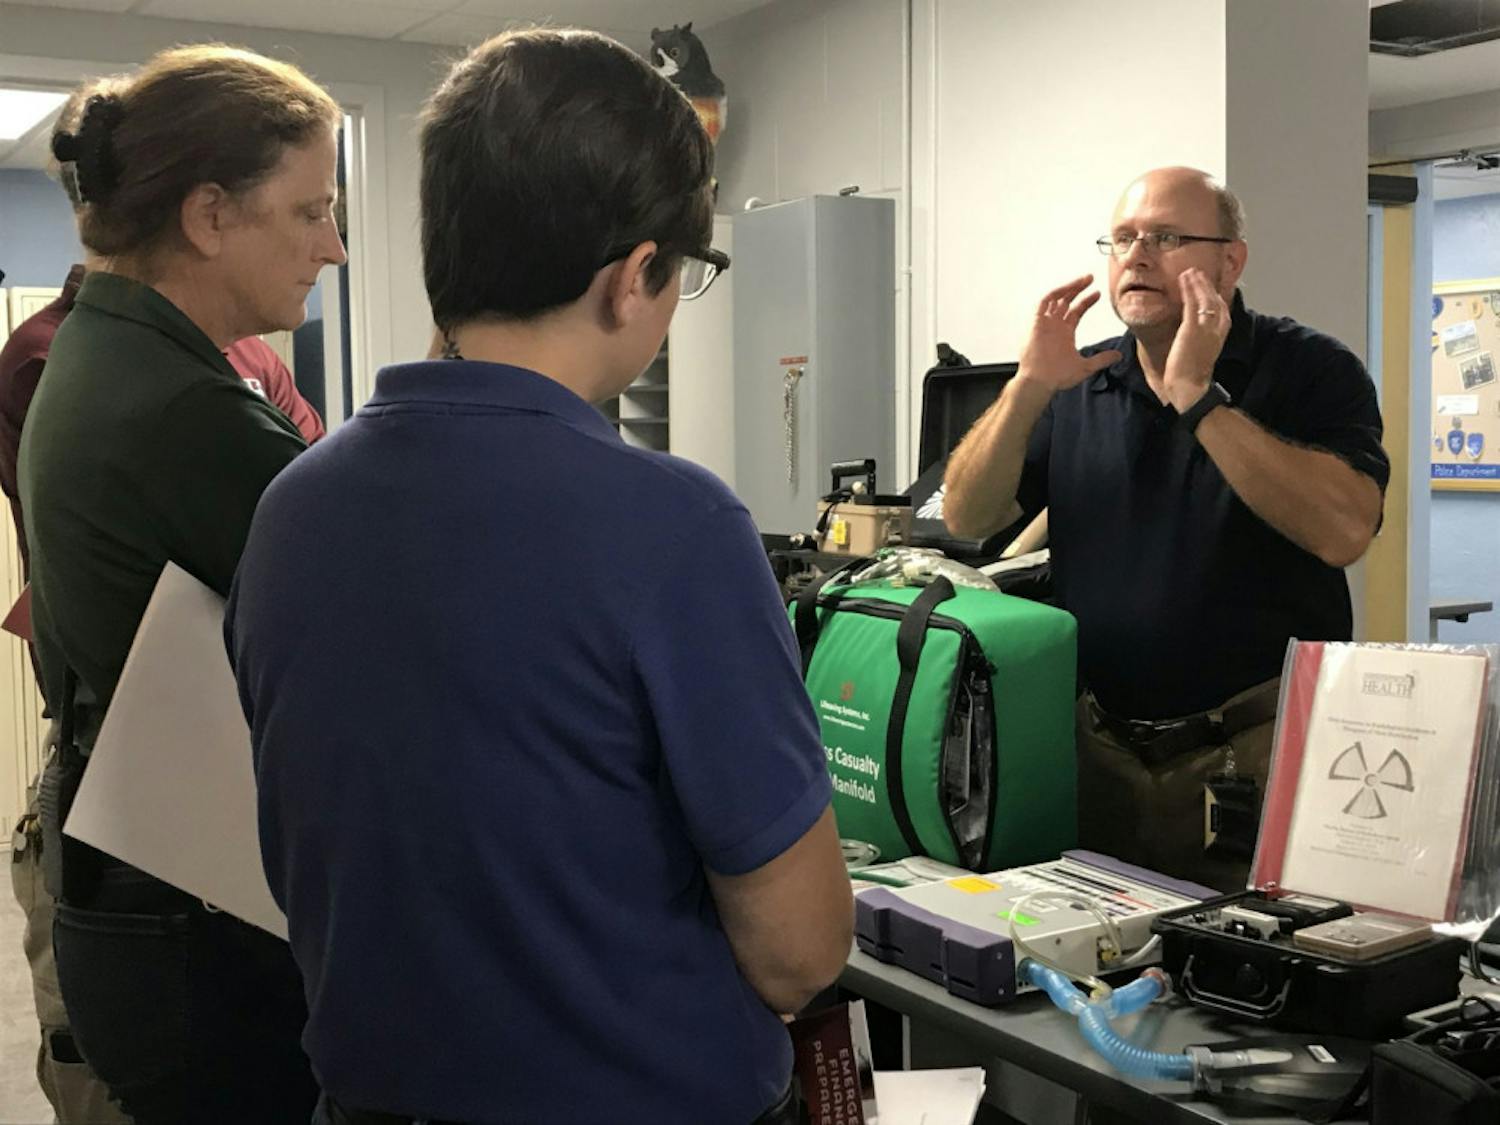 Florida Health representative Robert Linnens teaches attendees about mobile ventilators. The ventilator, a gray and purple box in front of him, was connected to an oxygen tank and an airbag mimicking lungs.
&nbsp;